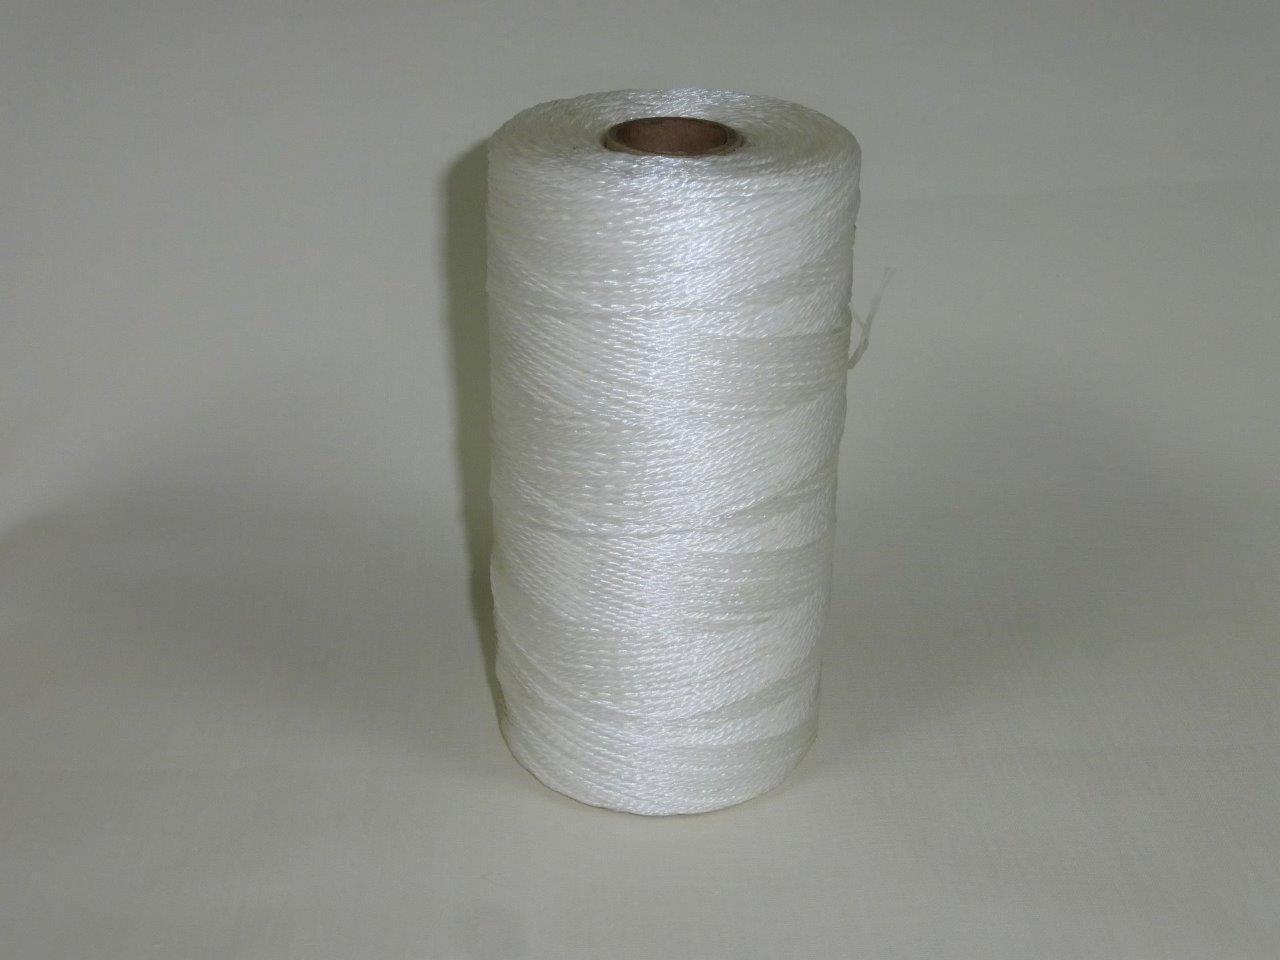 SPECIAL OFFER Upholstery supplies full cone 370 metres Nylon buttoning twine 